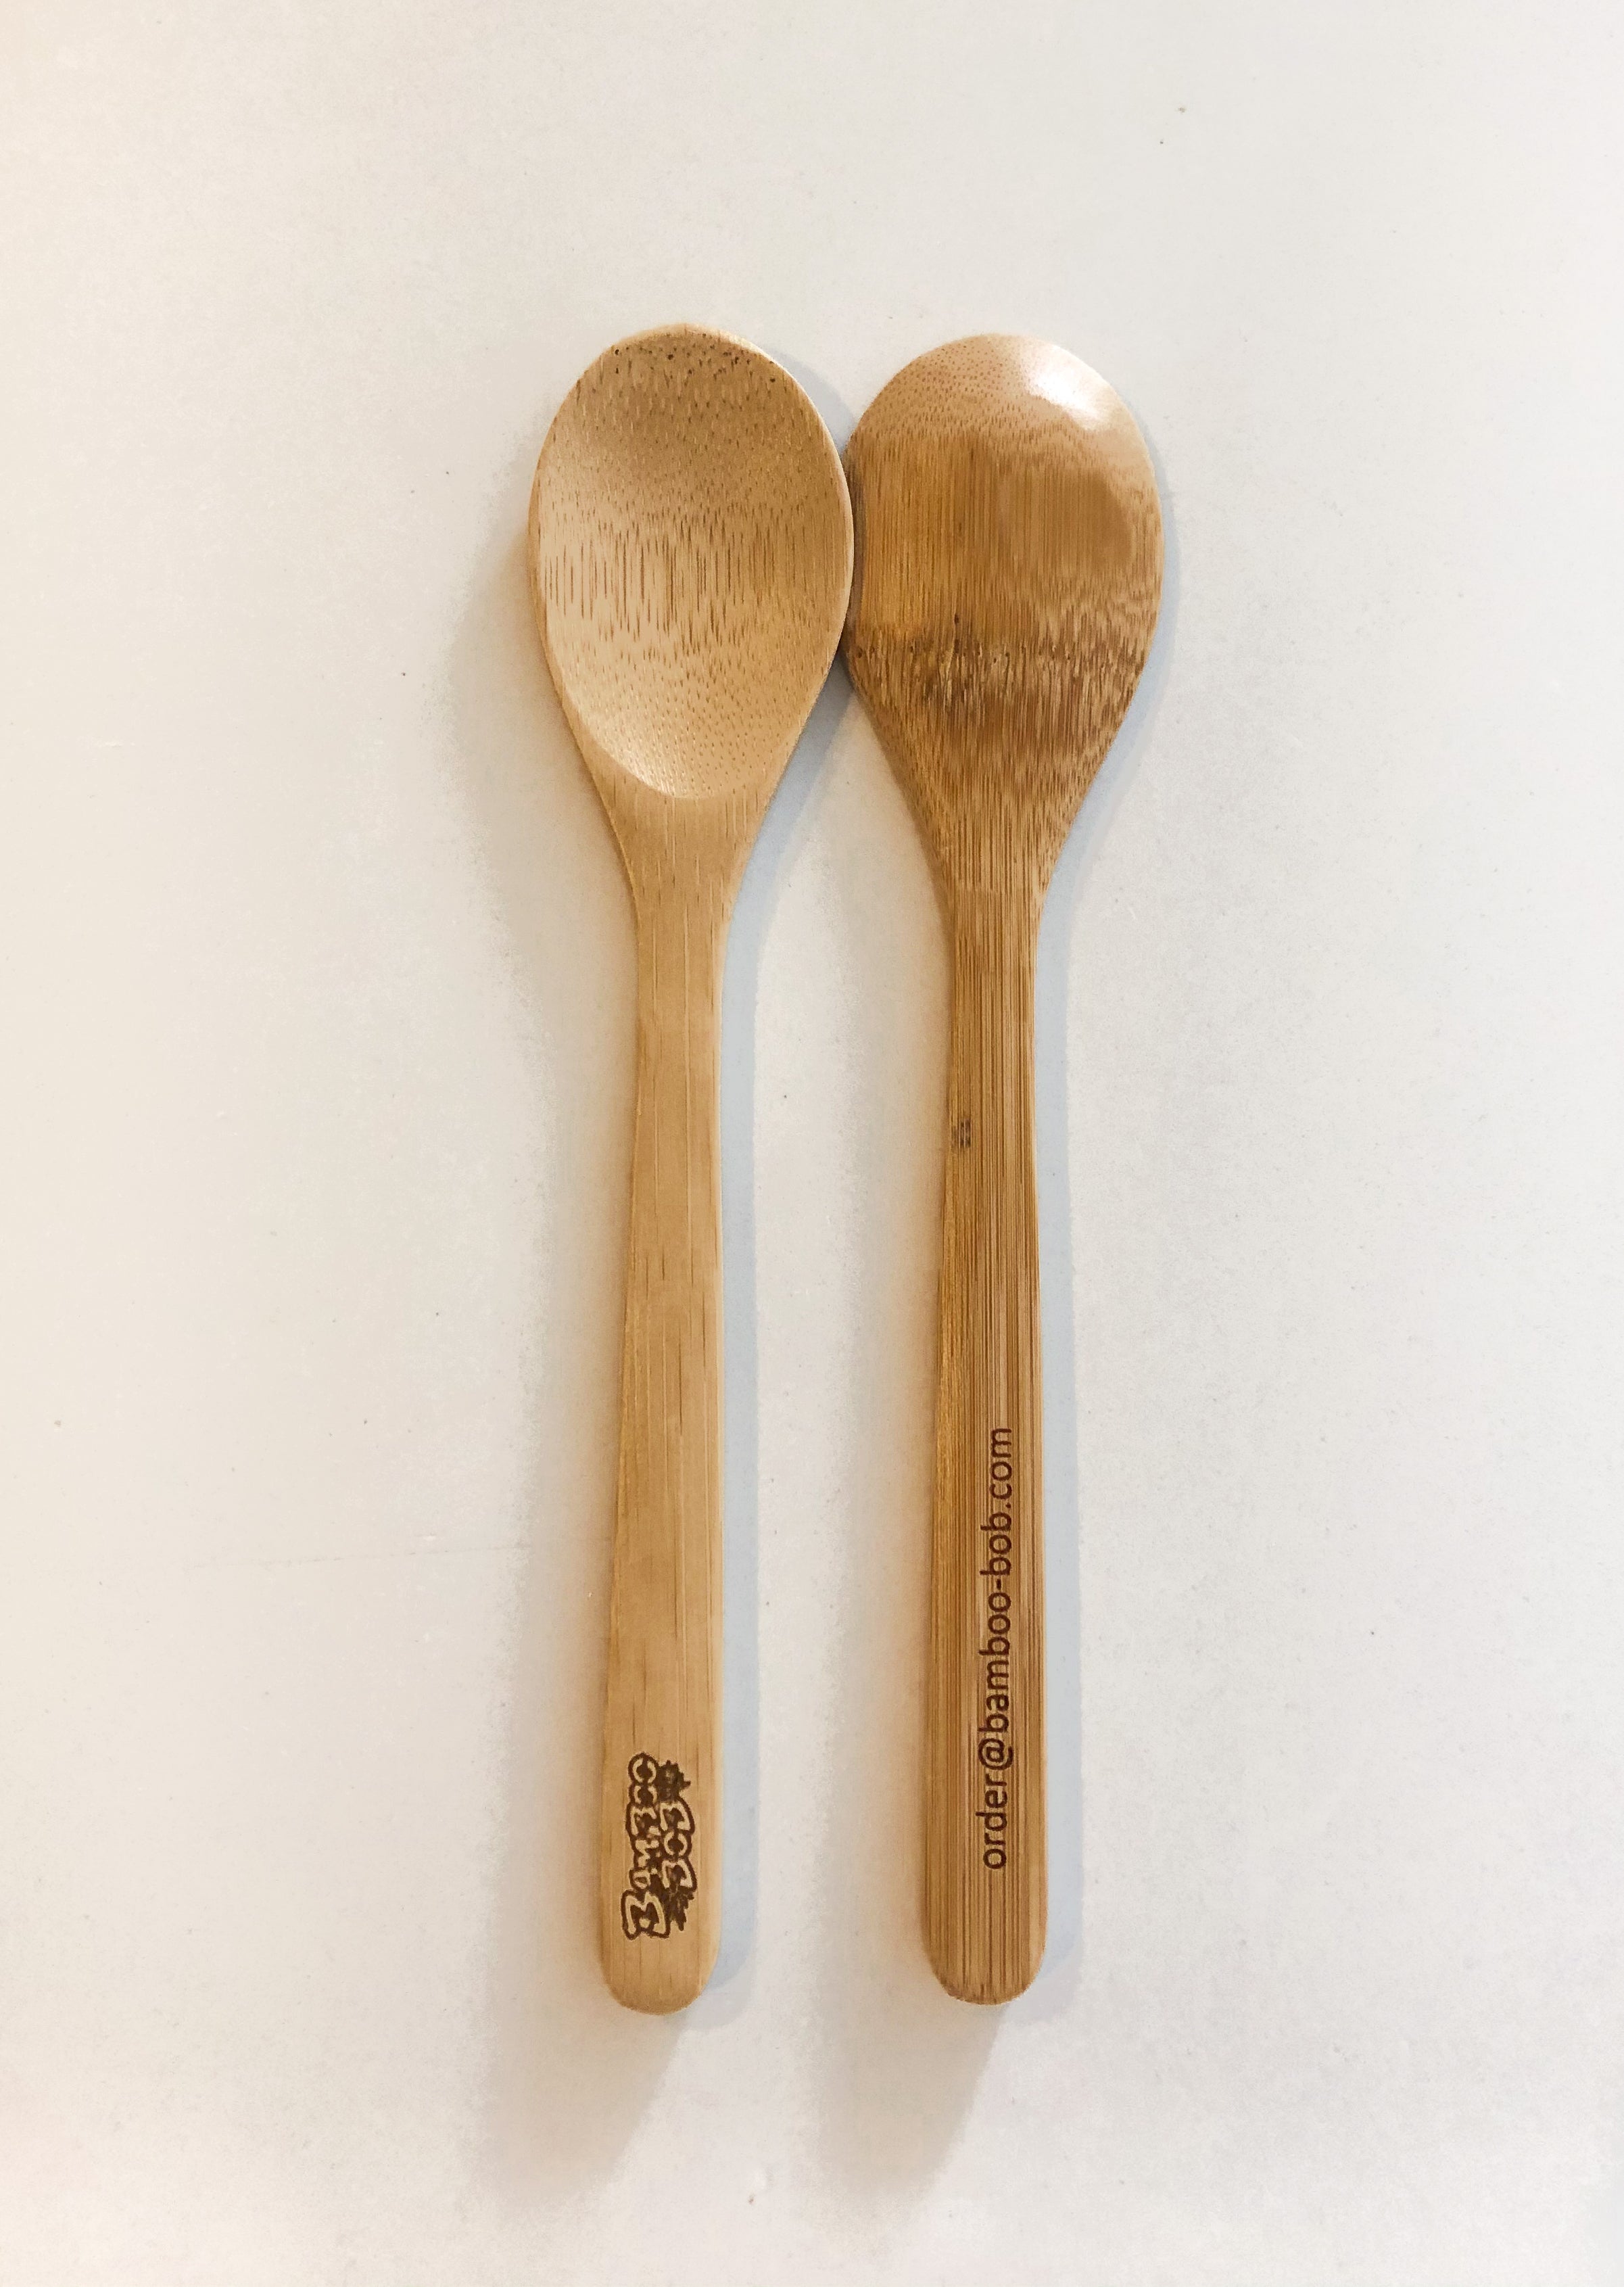 Wholesale / Branded - Bamboo "End the Plastic!" Eco Cutlery Kit (50 kits / carton)